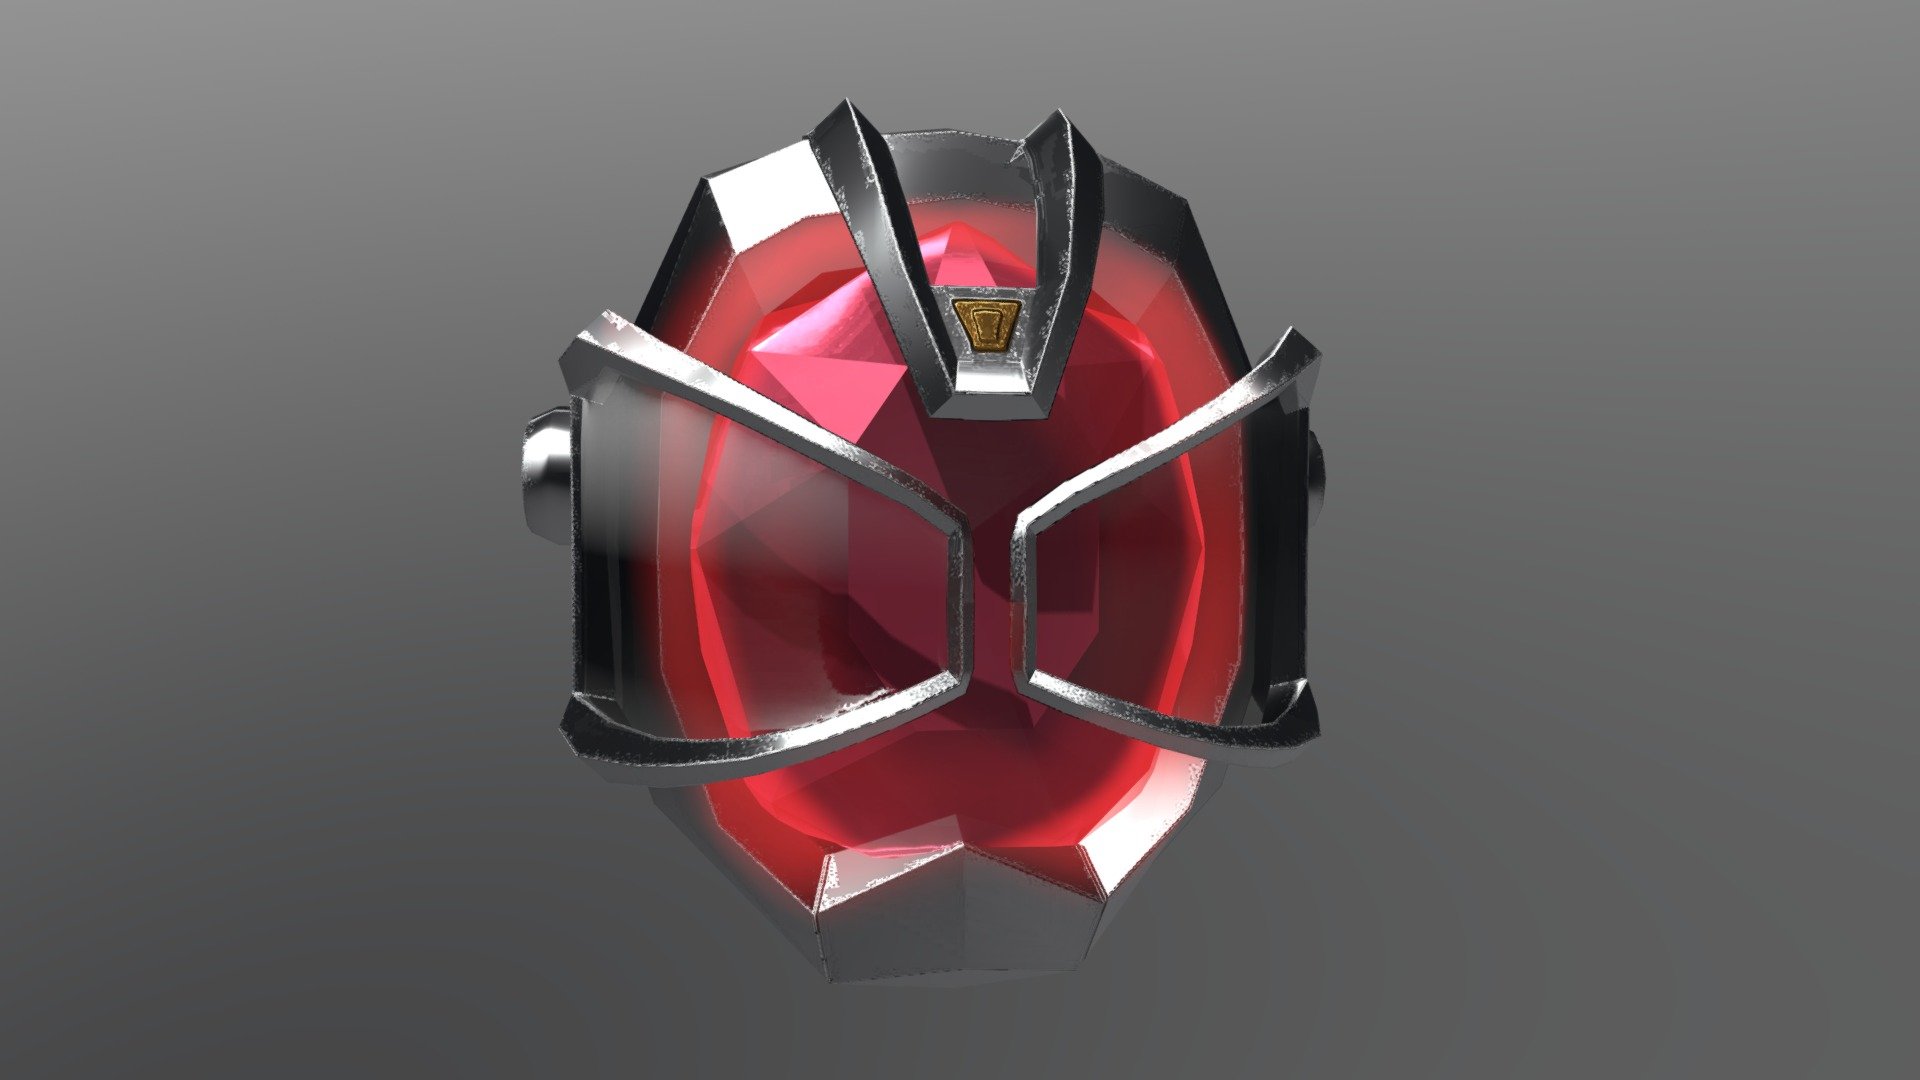 This is the Kamen Rider Wizard Ring Flame lowpoly model I made, I hope you will like it!
Welcome to visit my community account and enjoy the latest works!
ArtStation：https://www.artstation.com/artwork/9EewZv
facebook : https://www.facebook.com/JOYlenCE/
Twitter : https://twitter.com/LaSamFish - Wizard Ring Flame - 3D model by LaSamFish/辣鹹魚 (@lasamfish) 3d model